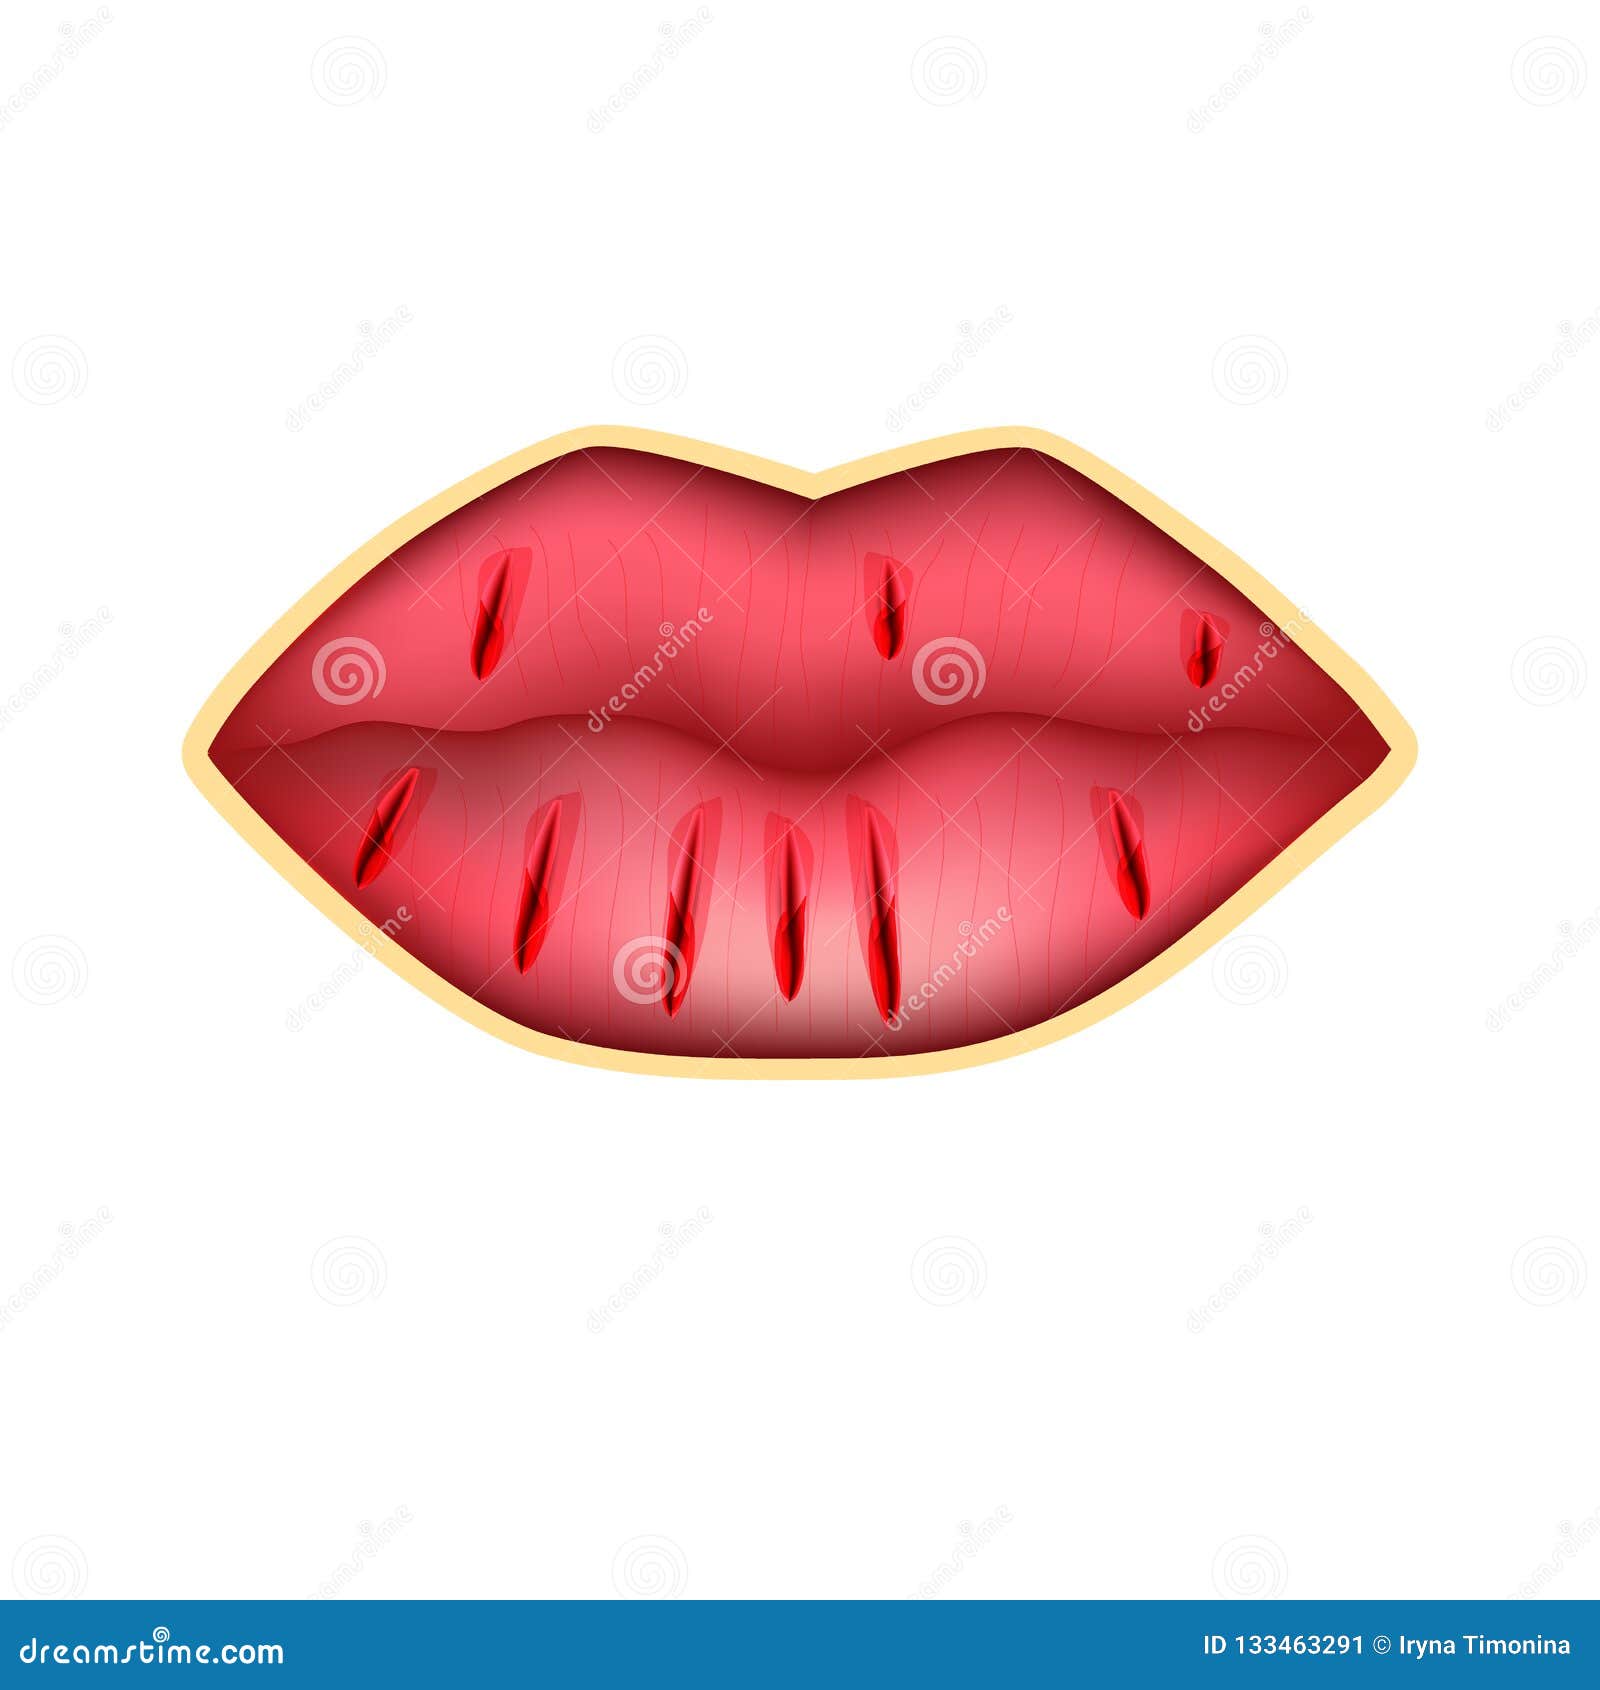 Dry Lips Before And After Cliparts, Stock Vector and Royalty Free Dry Lips  Before And After Illustrations